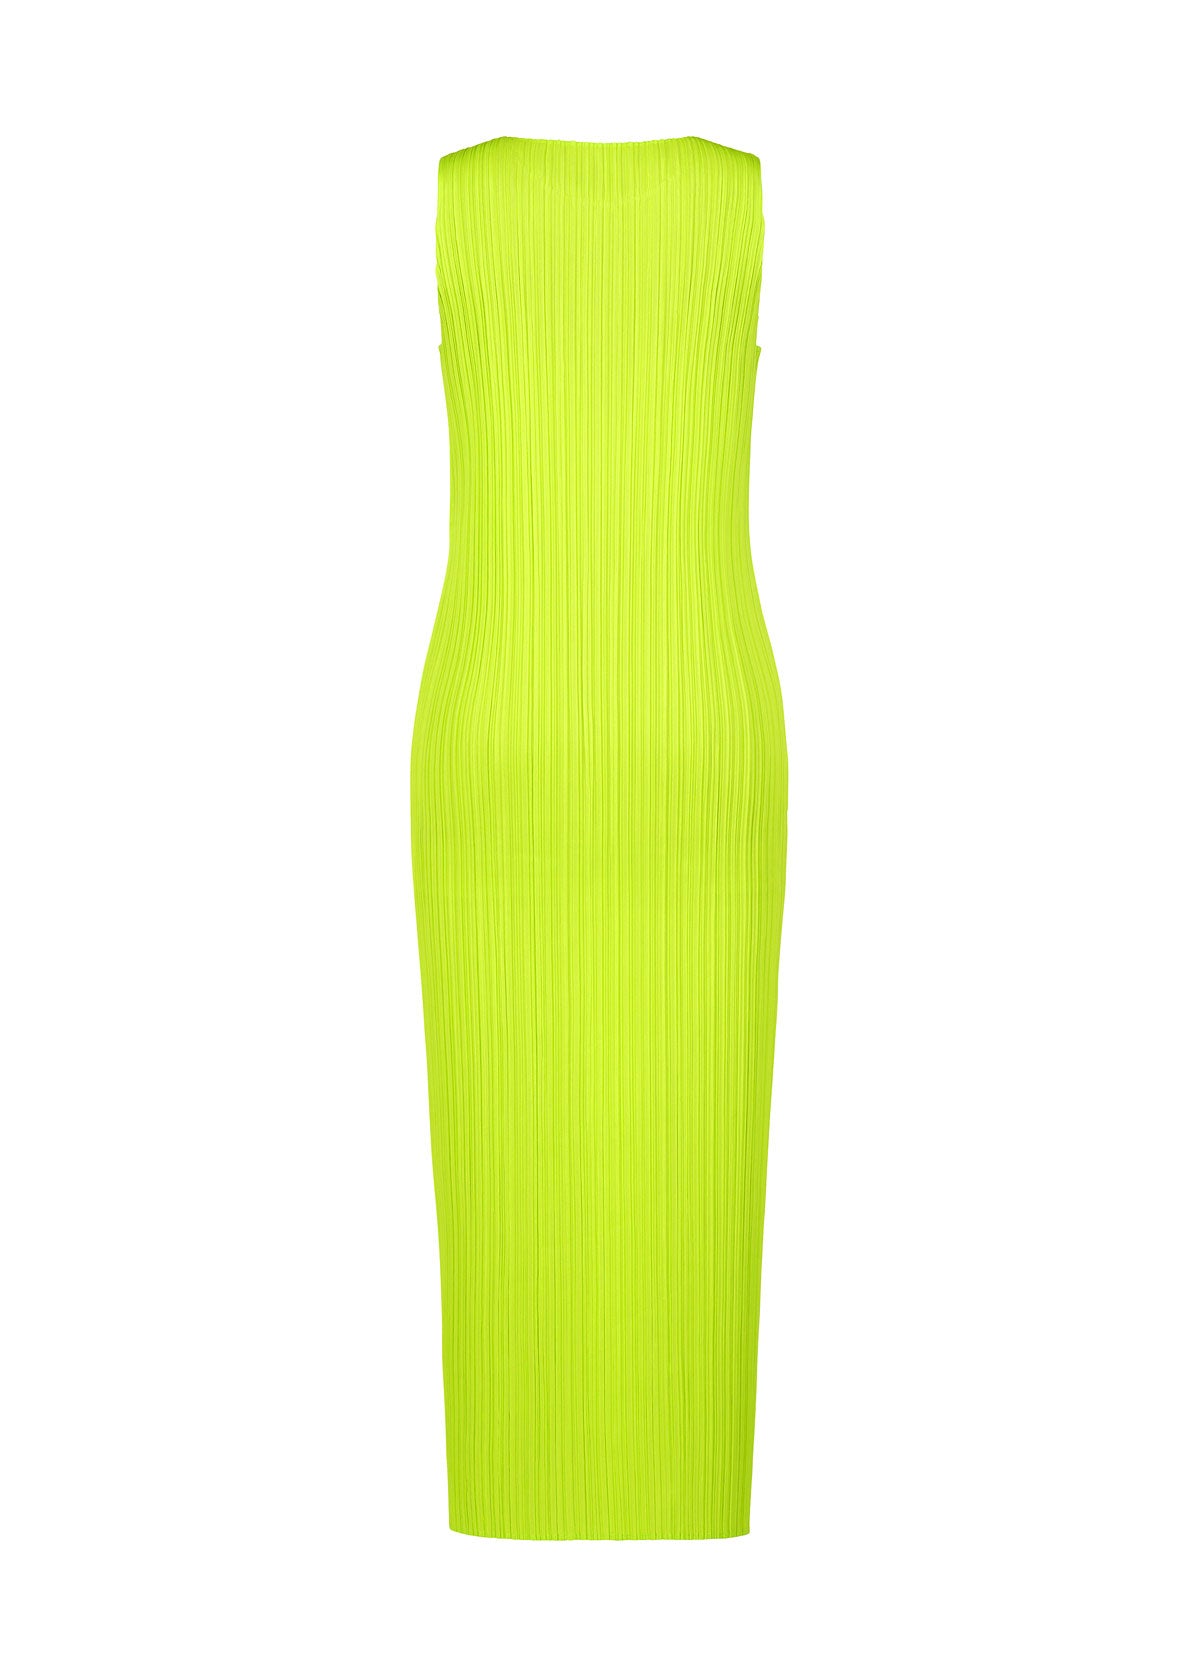 NEW COLORFUL BASICS 3 DRESS | The official ISSEY MIYAKE ONLINE 